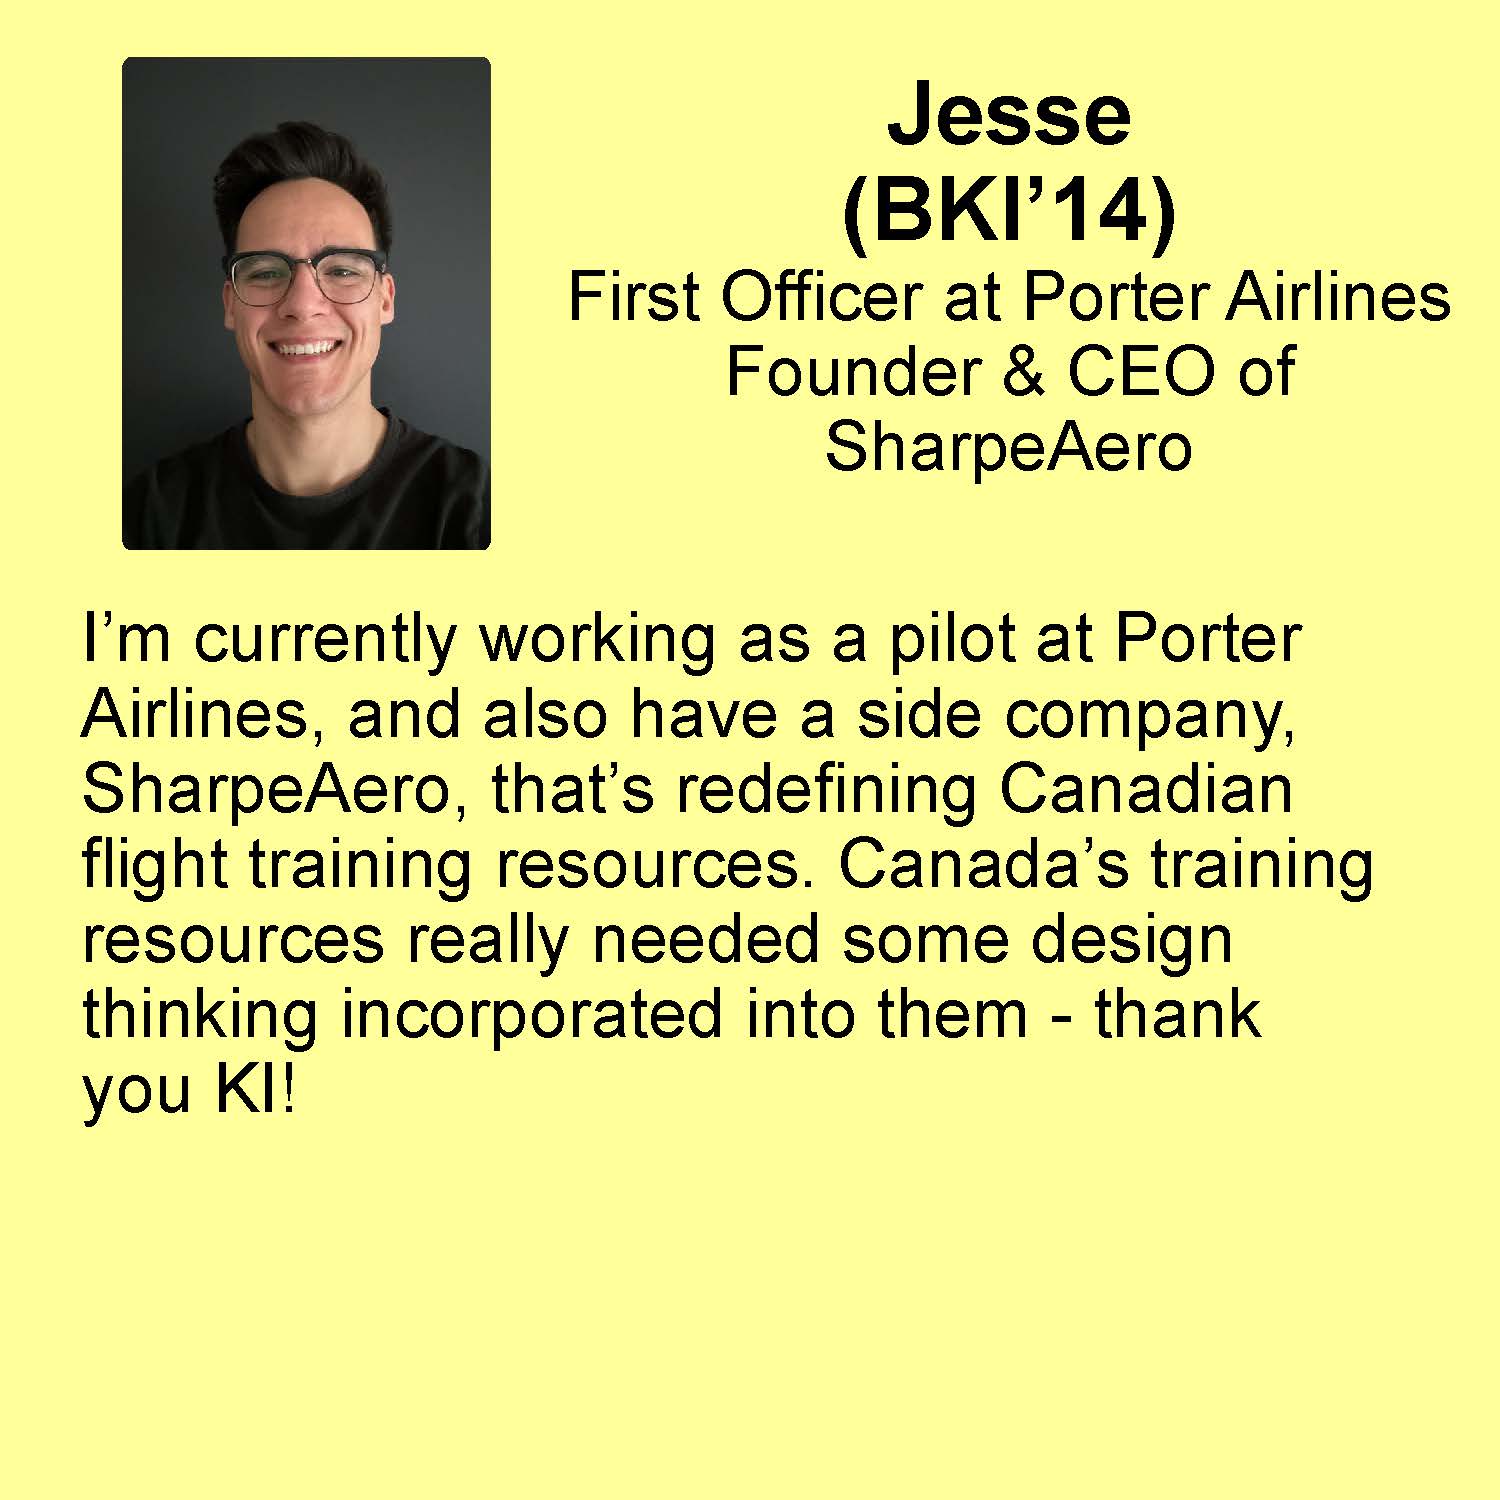 Jesse profile First Officer at Porter AirlinesFounder & CEO of SharpeAero